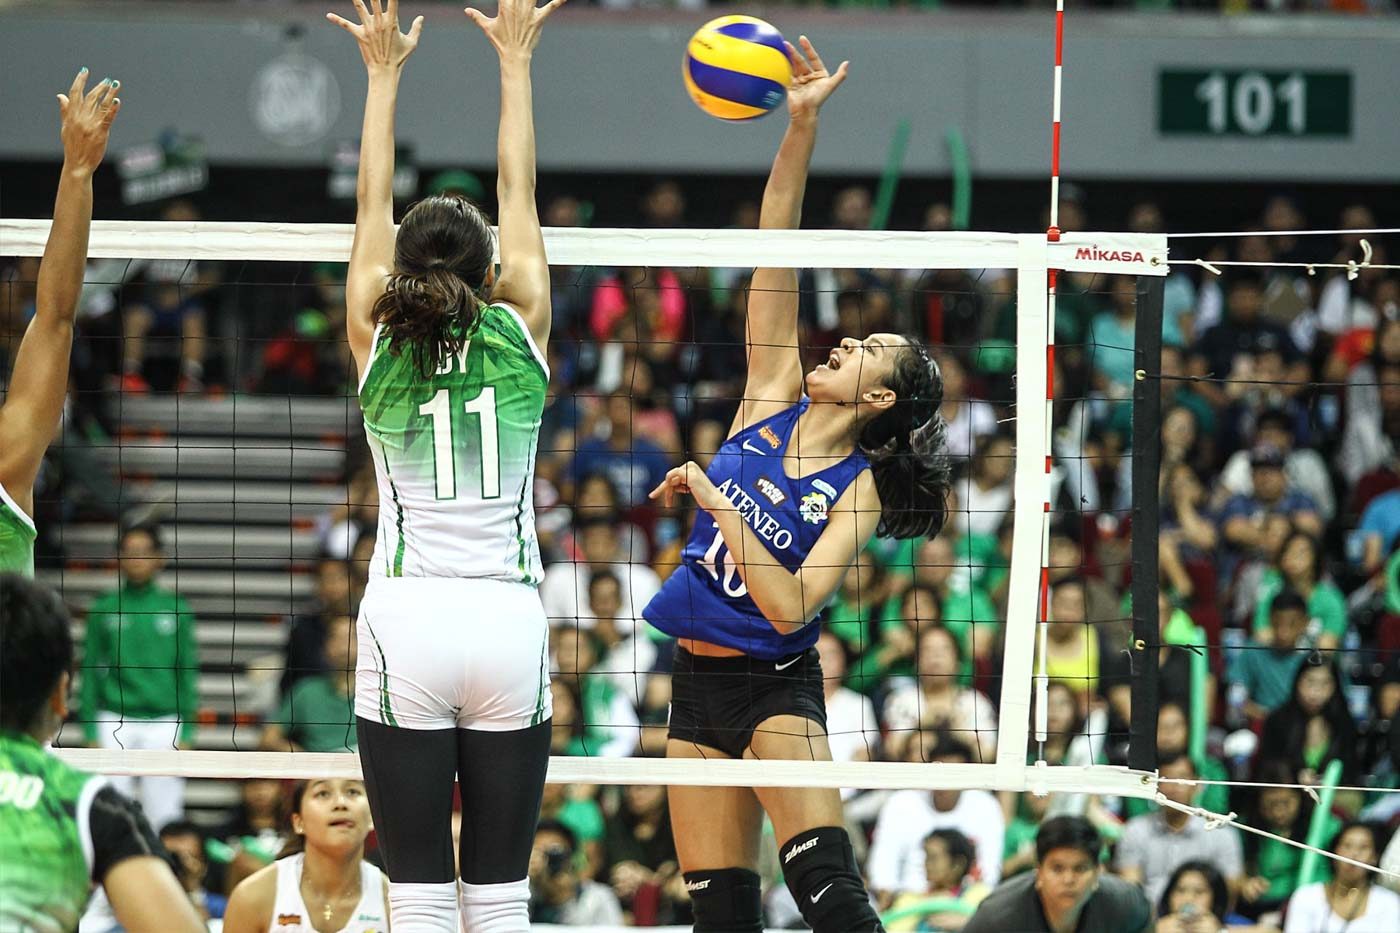 After fighting through 3 ACL tears, Ateneo’s Kat Tolentino finds blessings